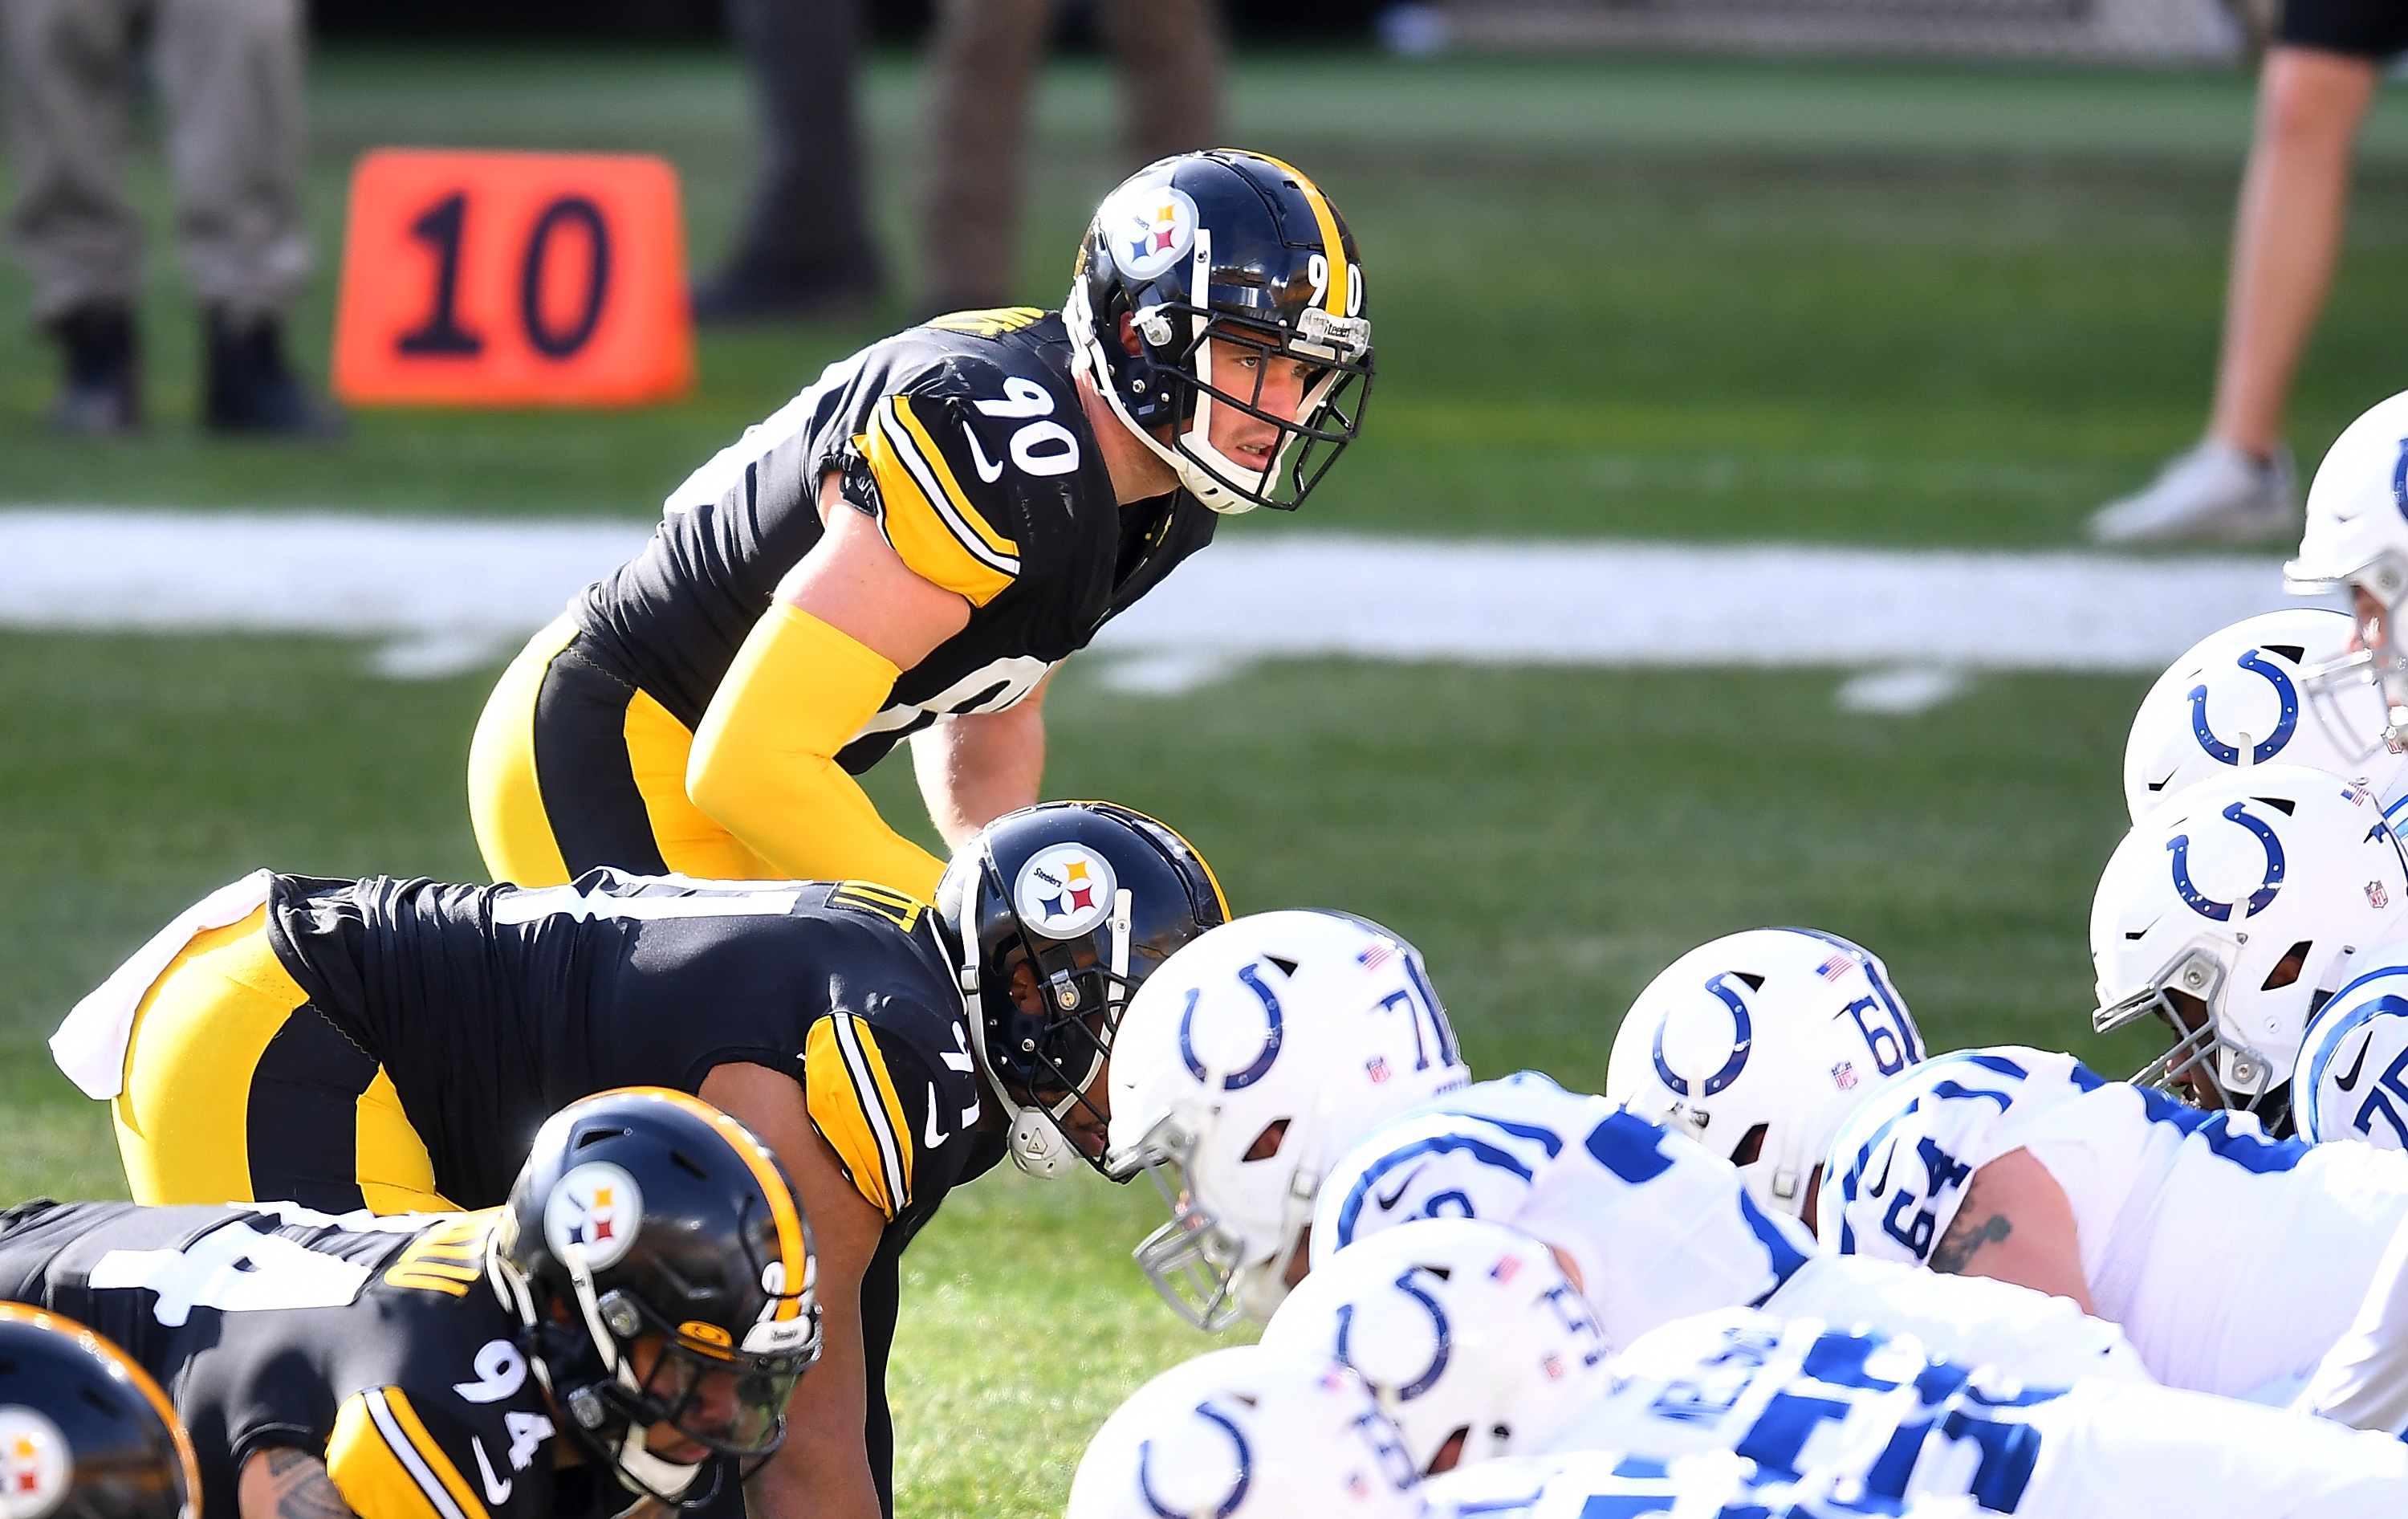 Monday Night Football live stream: how to watch Steelers at Colts